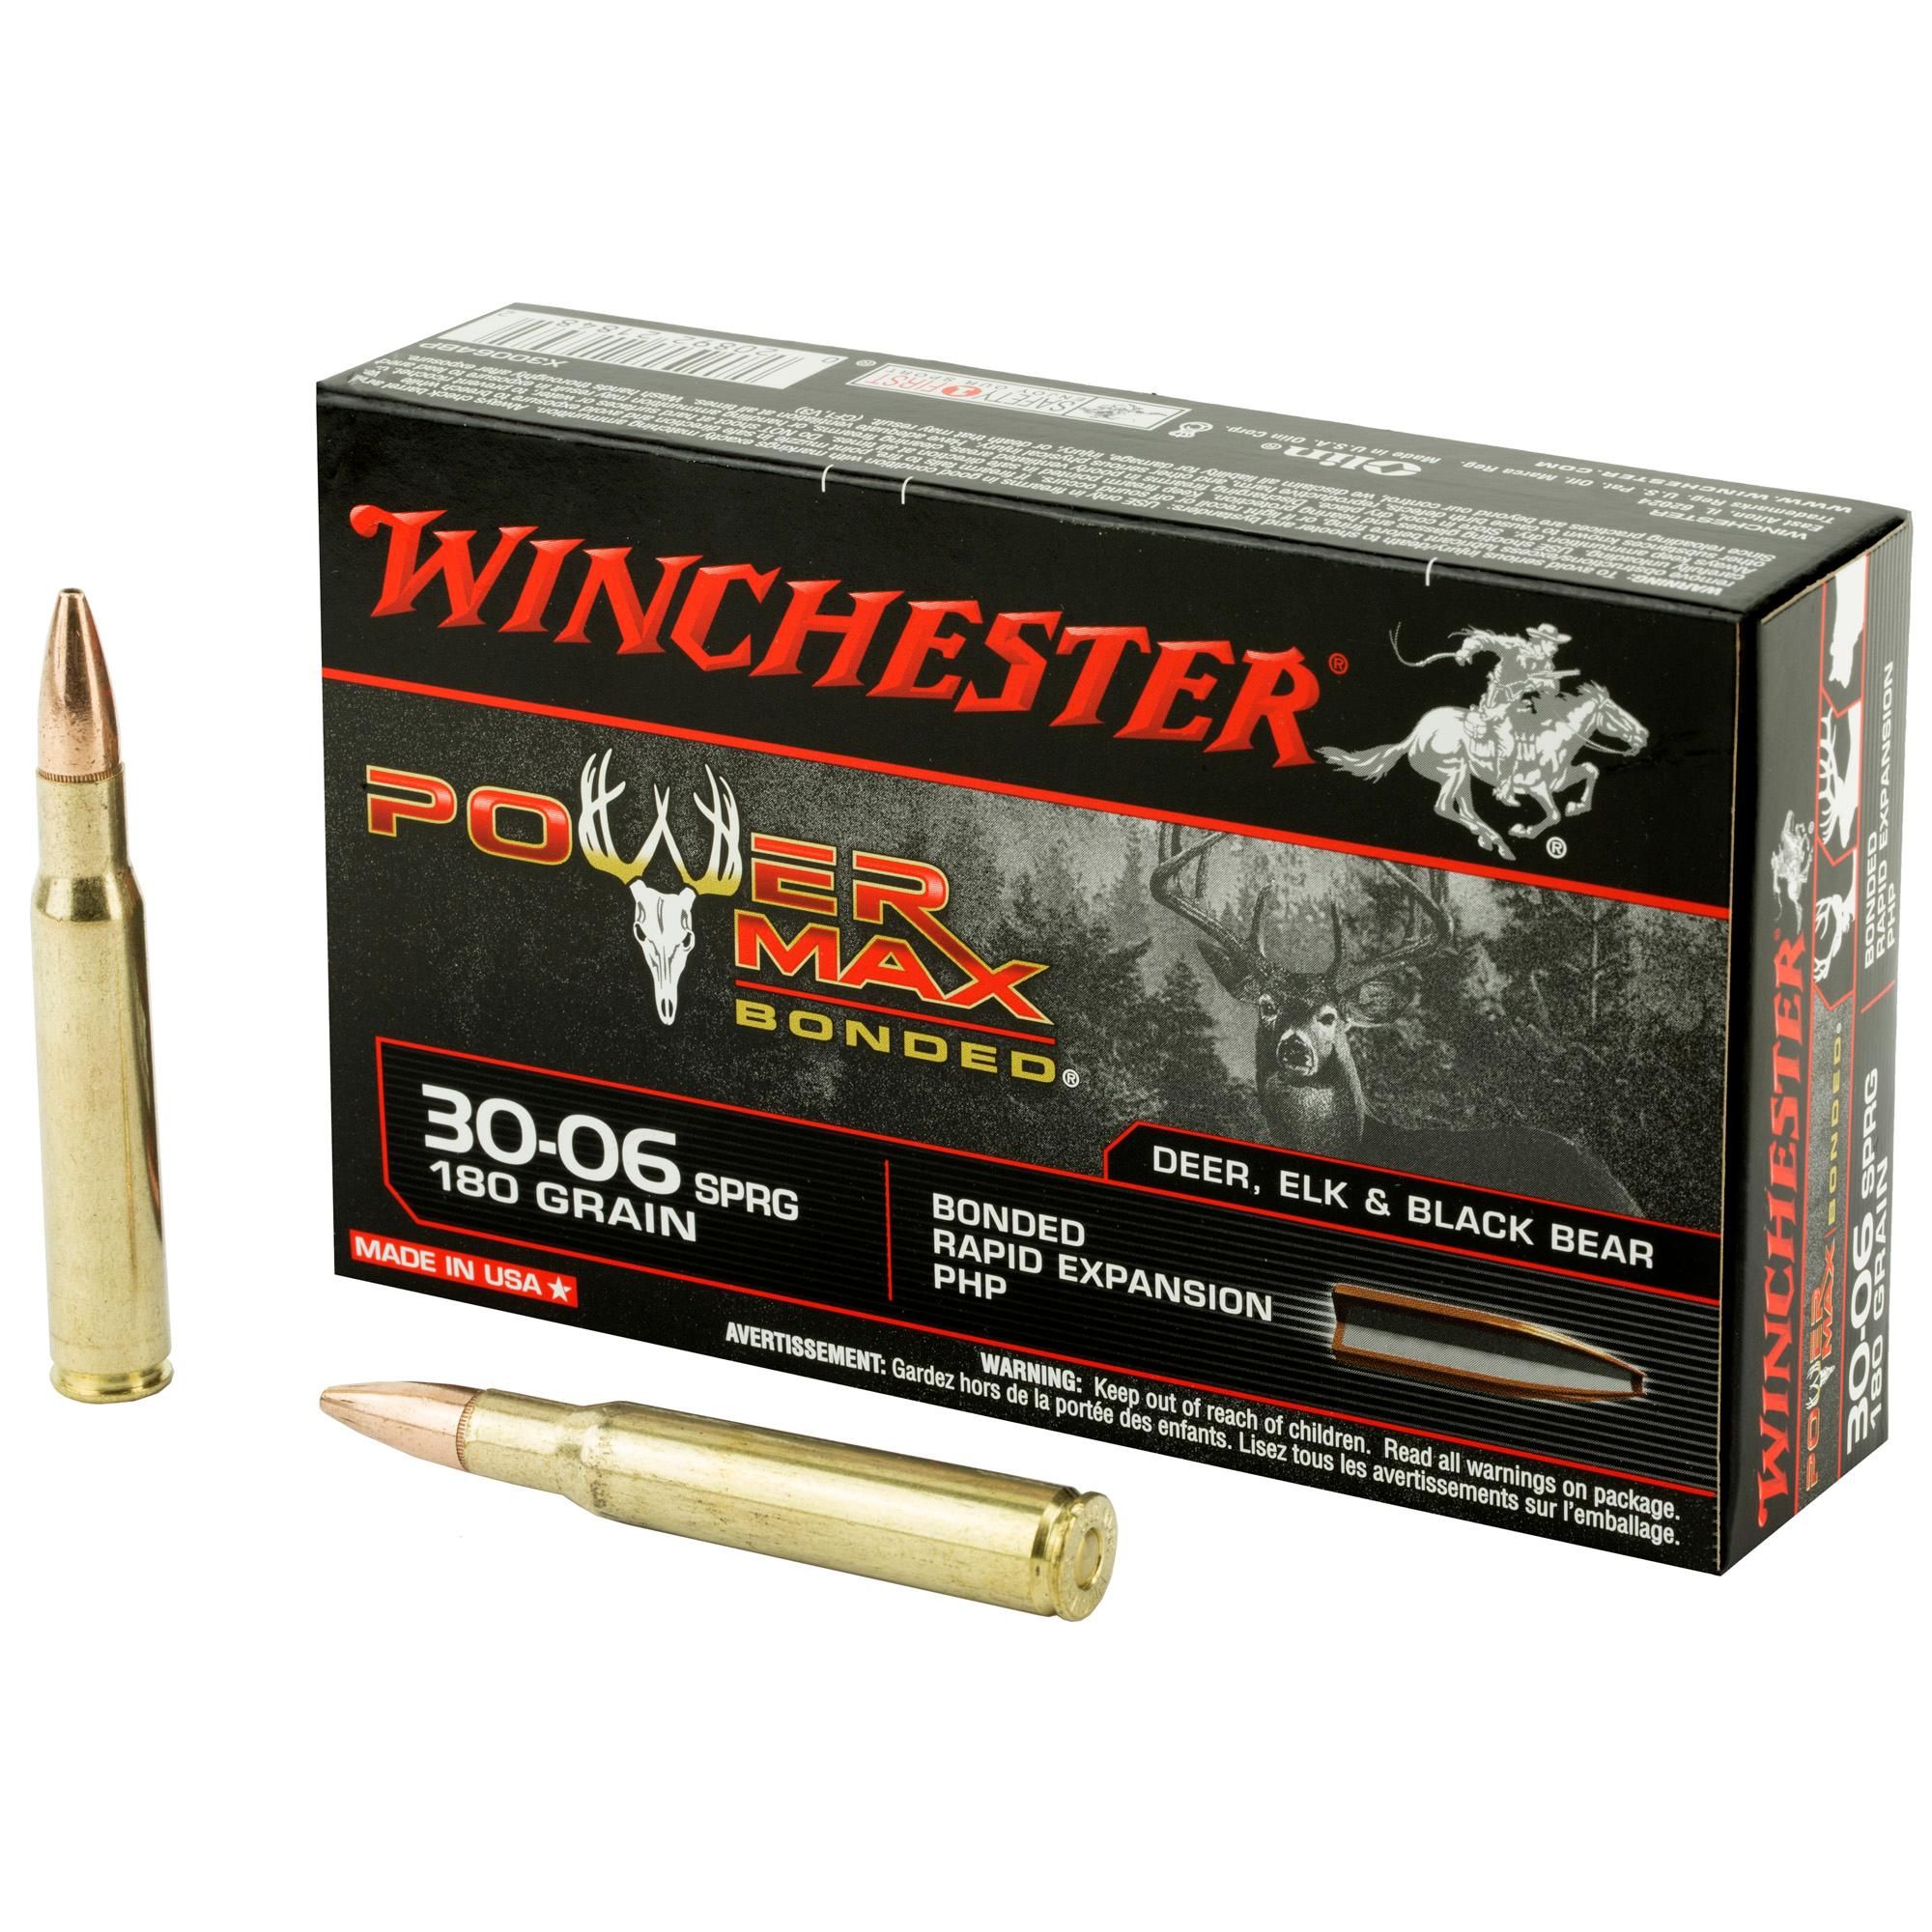 Winchester Ammo Reviews - Quality Ammunition